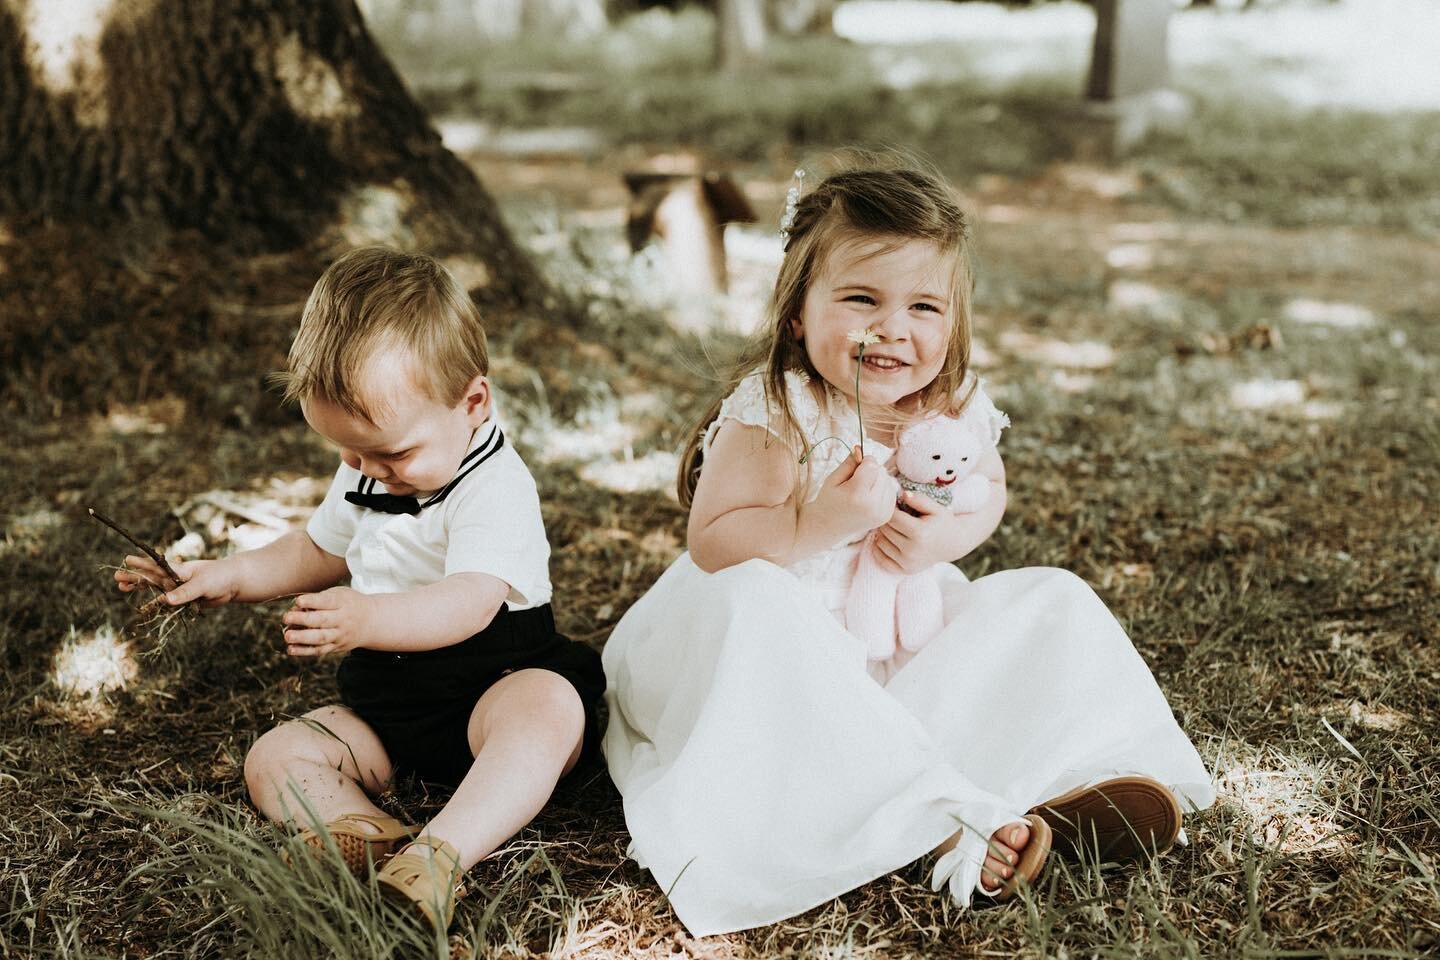 Eloise &amp; Byron✨🪷 I was invited to a christening a few weeks back to take pictures of these two sweet tots. Aren&rsquo;t they the dearest! 🥹🫶 
@ejanderson03 
.
.
.
.
#familyshoot #devonphotographer